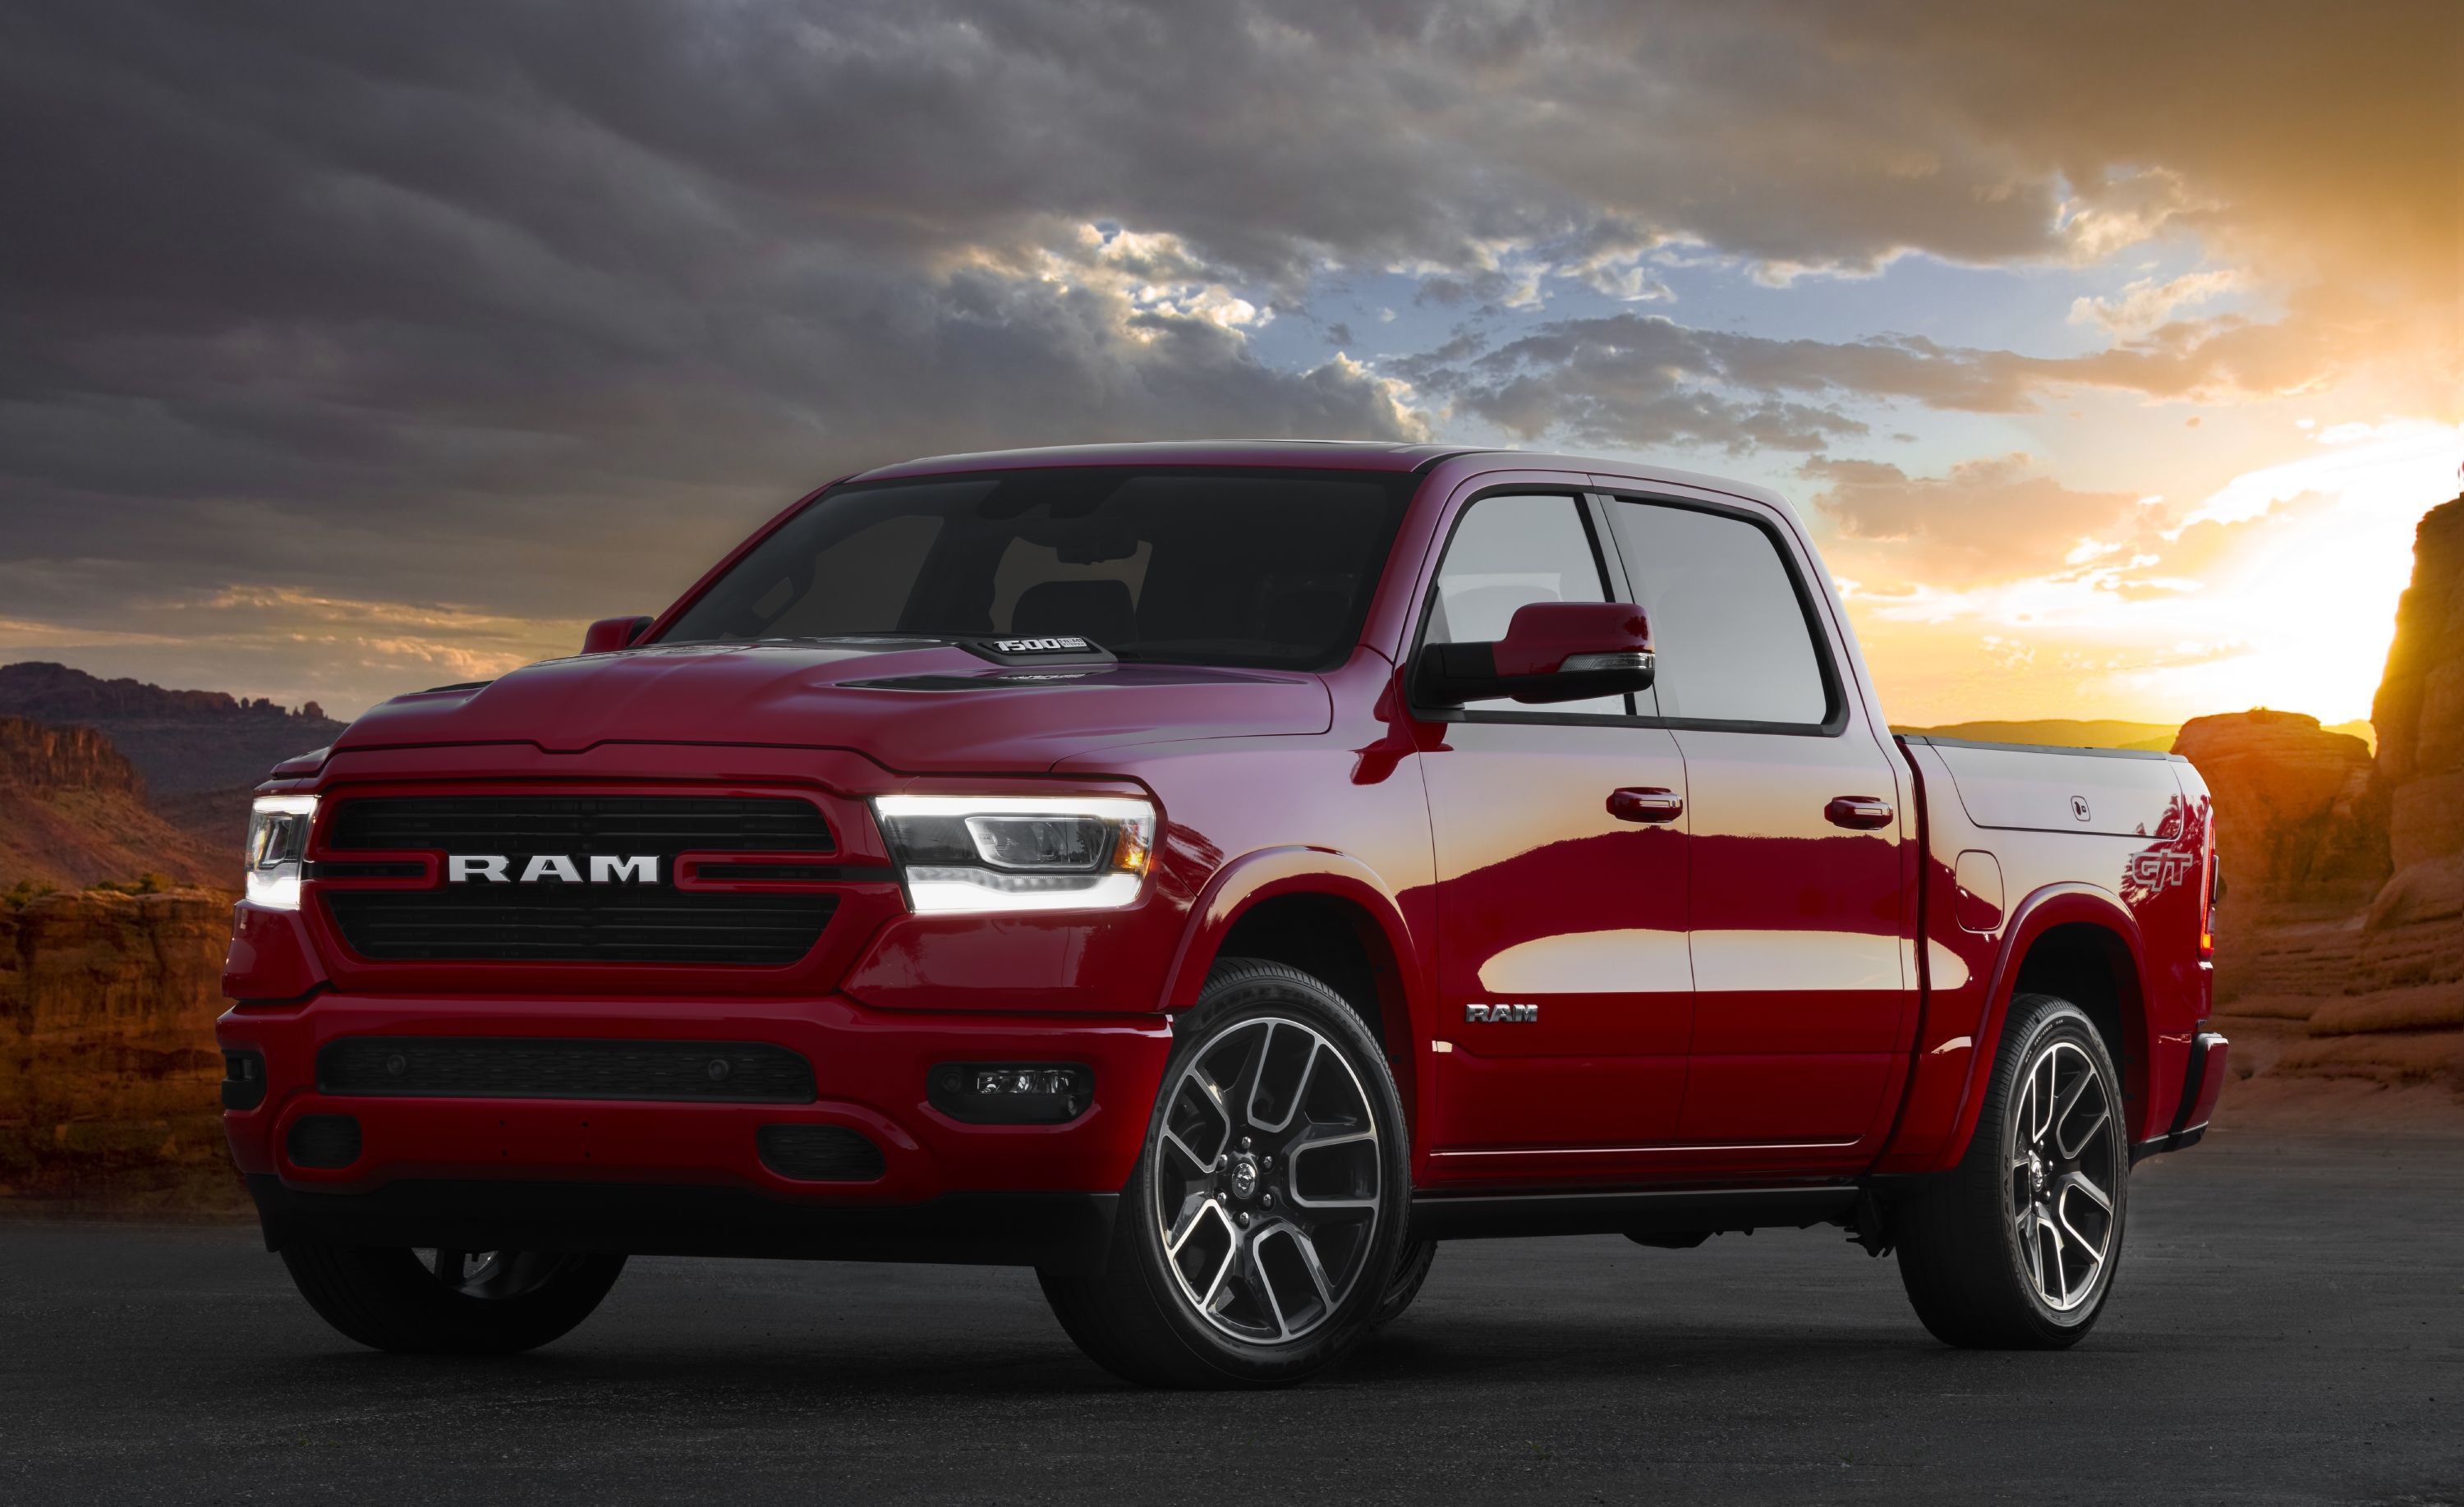 2022 Ram 1500 Laramie G/T: Hot-rod pickup with a less subtle touch